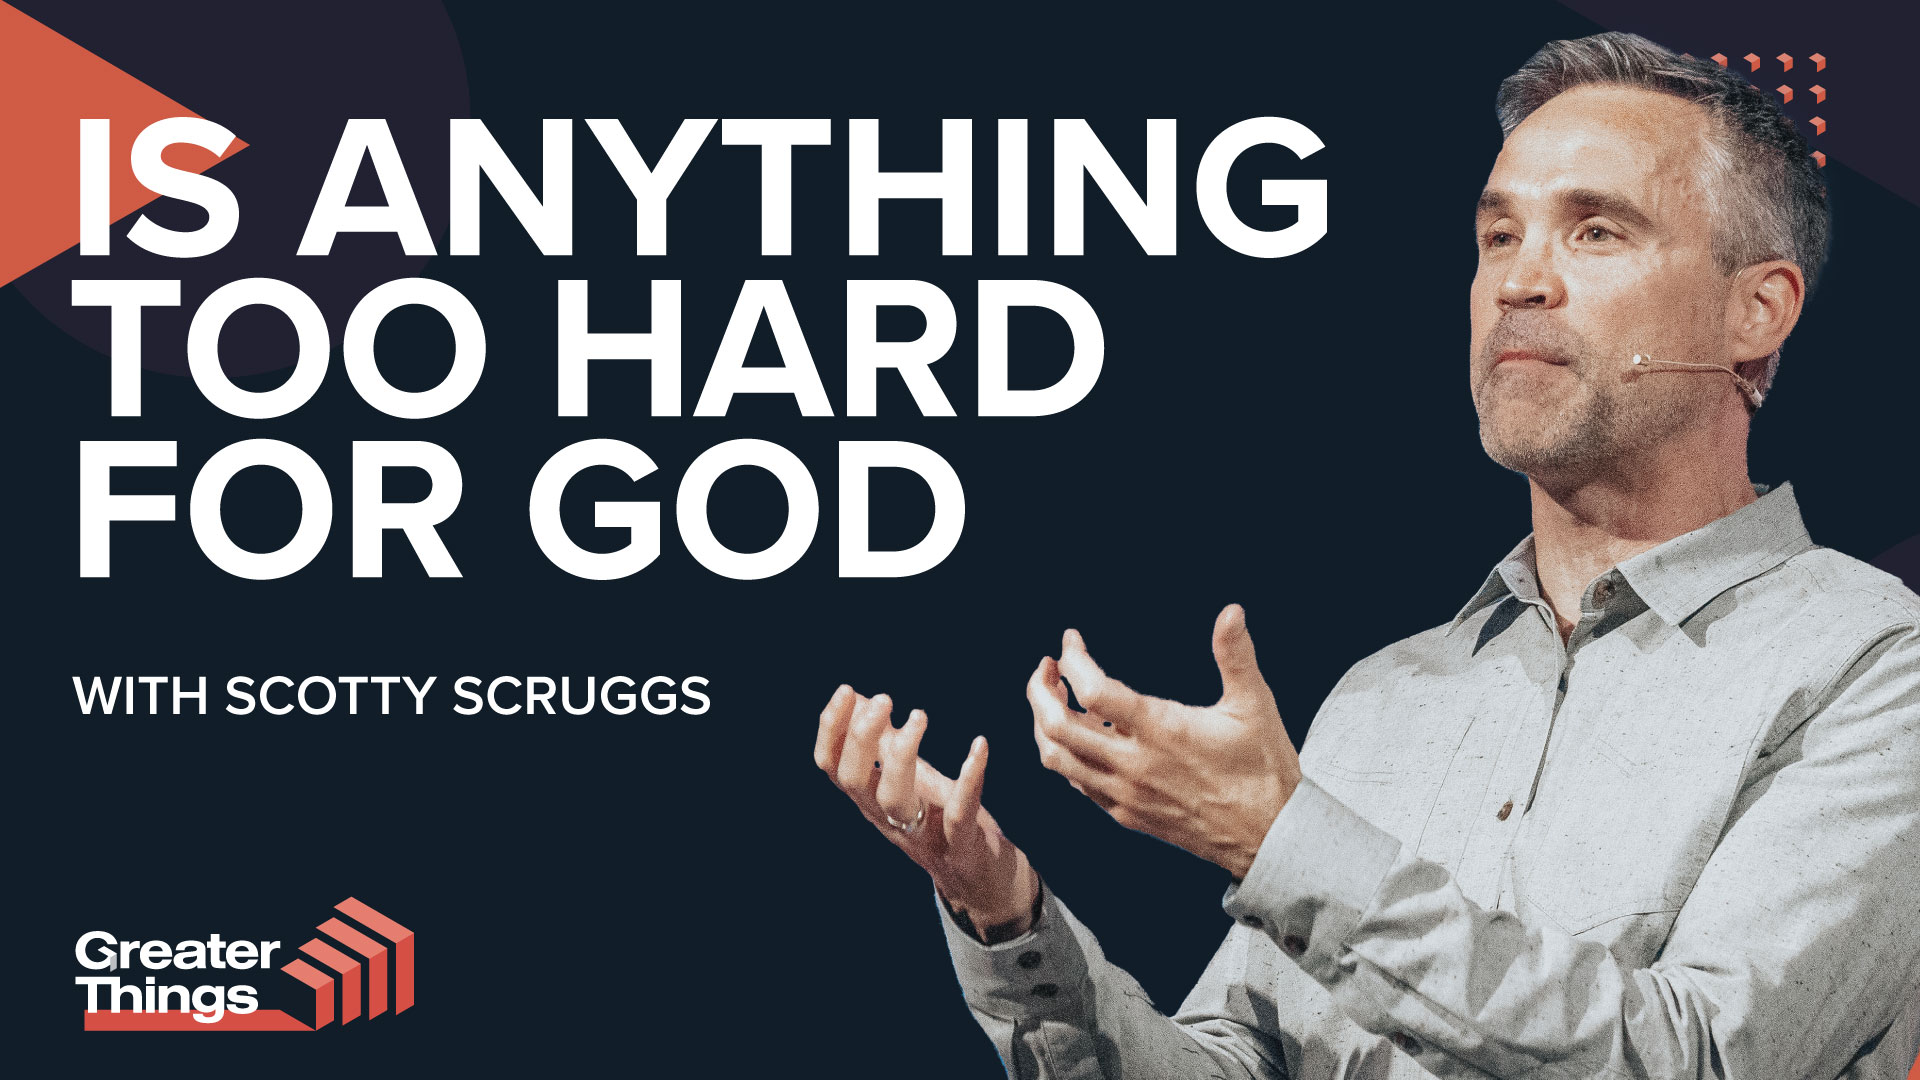 Is Anything Too Hard For God